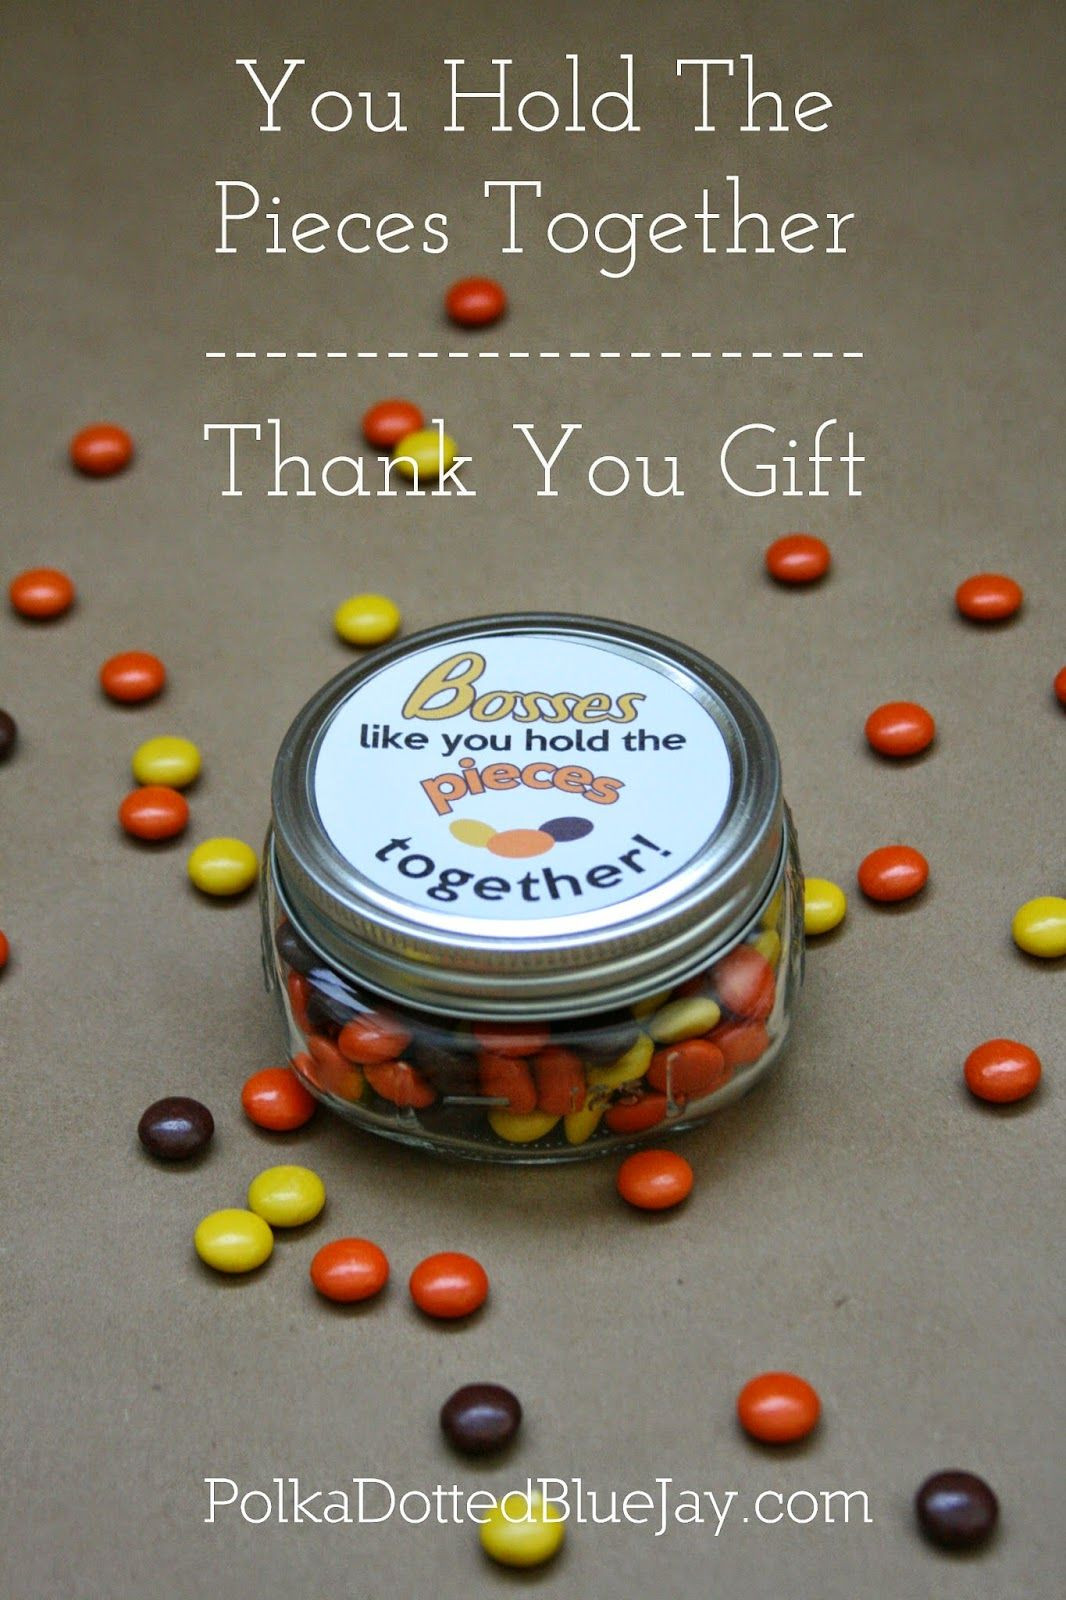 Thank You Gift Ideas For Boss
 15 Affordable Bosses Day Gift Ideas